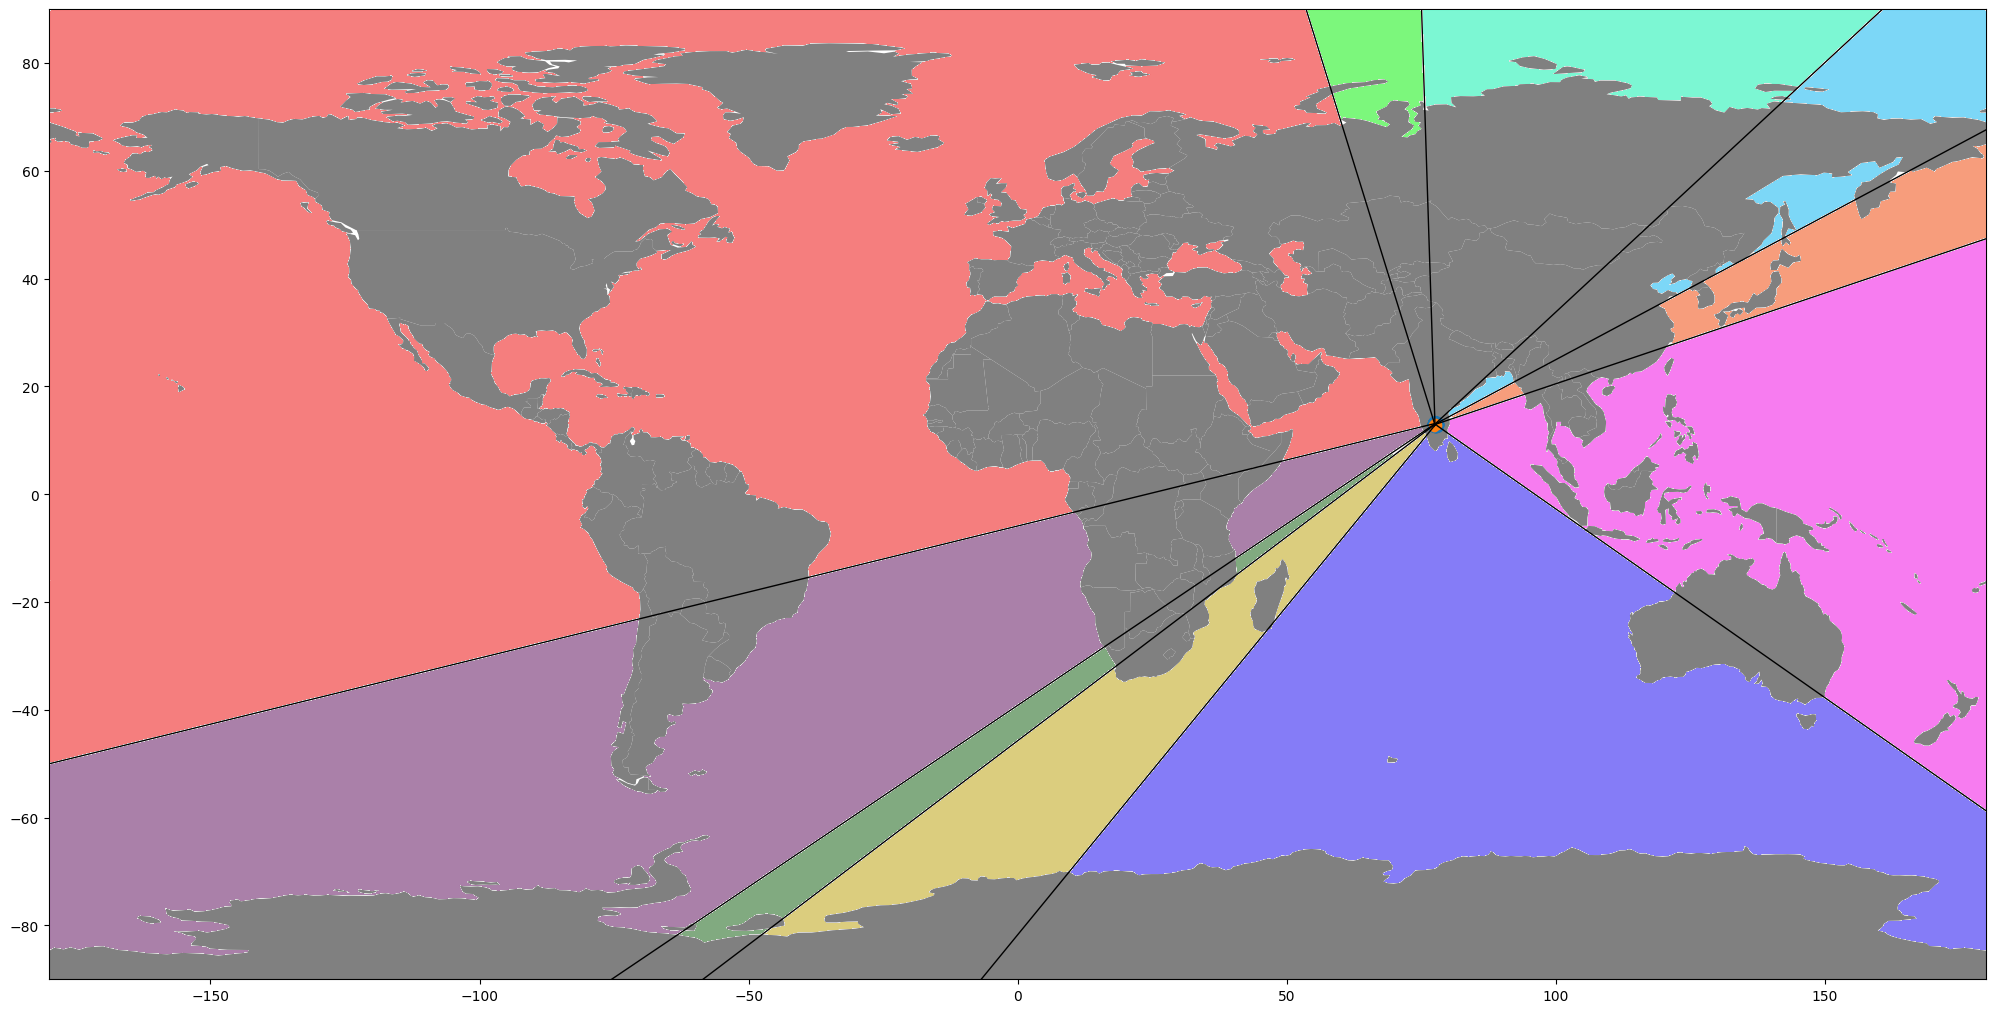 Voronoi map of the world with the closest warehouse